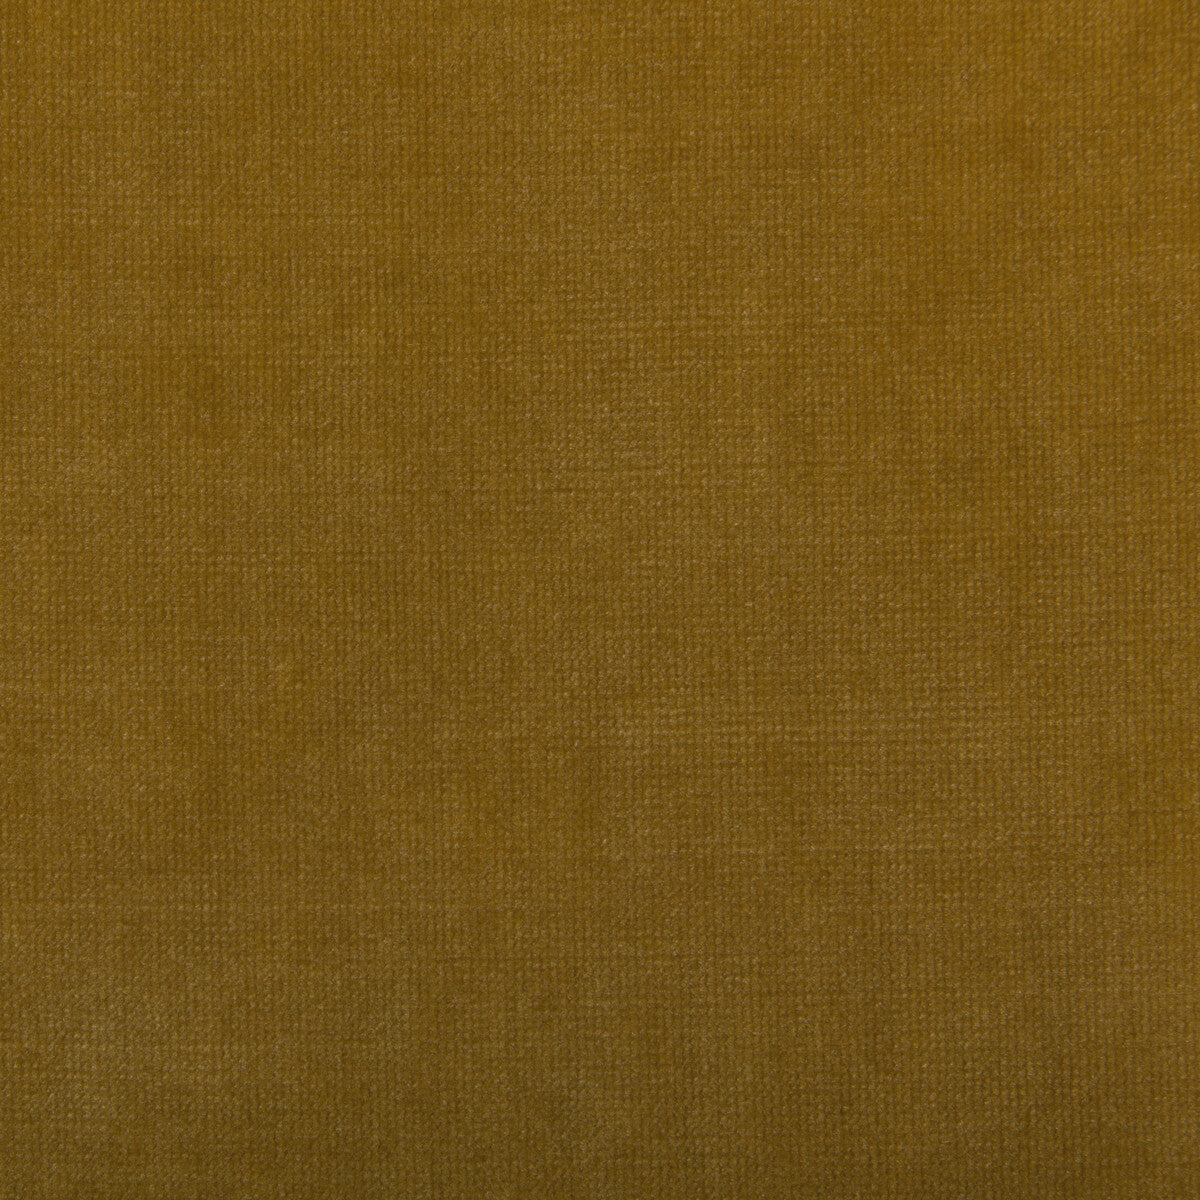 Chessford fabric in gold color - pattern 35360.4.0 - by Kravet Smart in the Performance collection